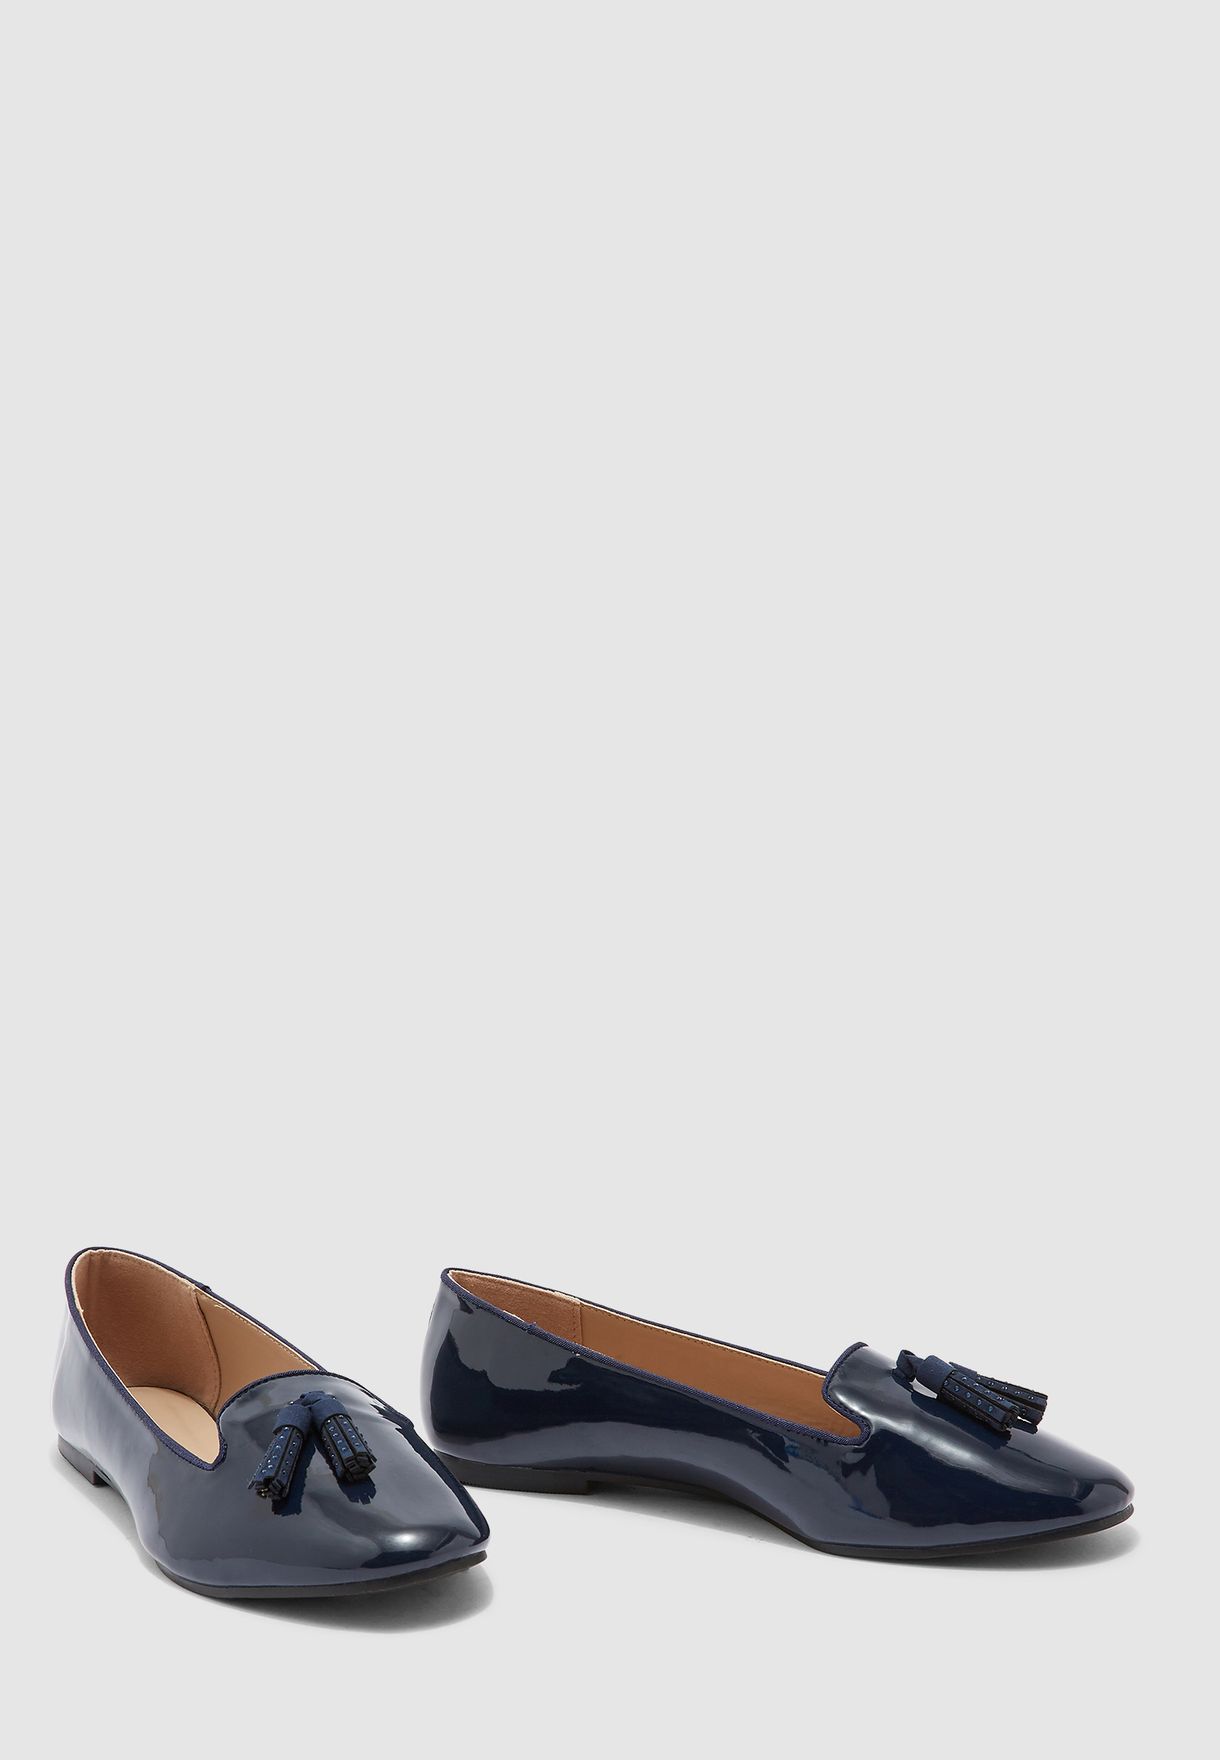 dorothy perkins wide fit loafers